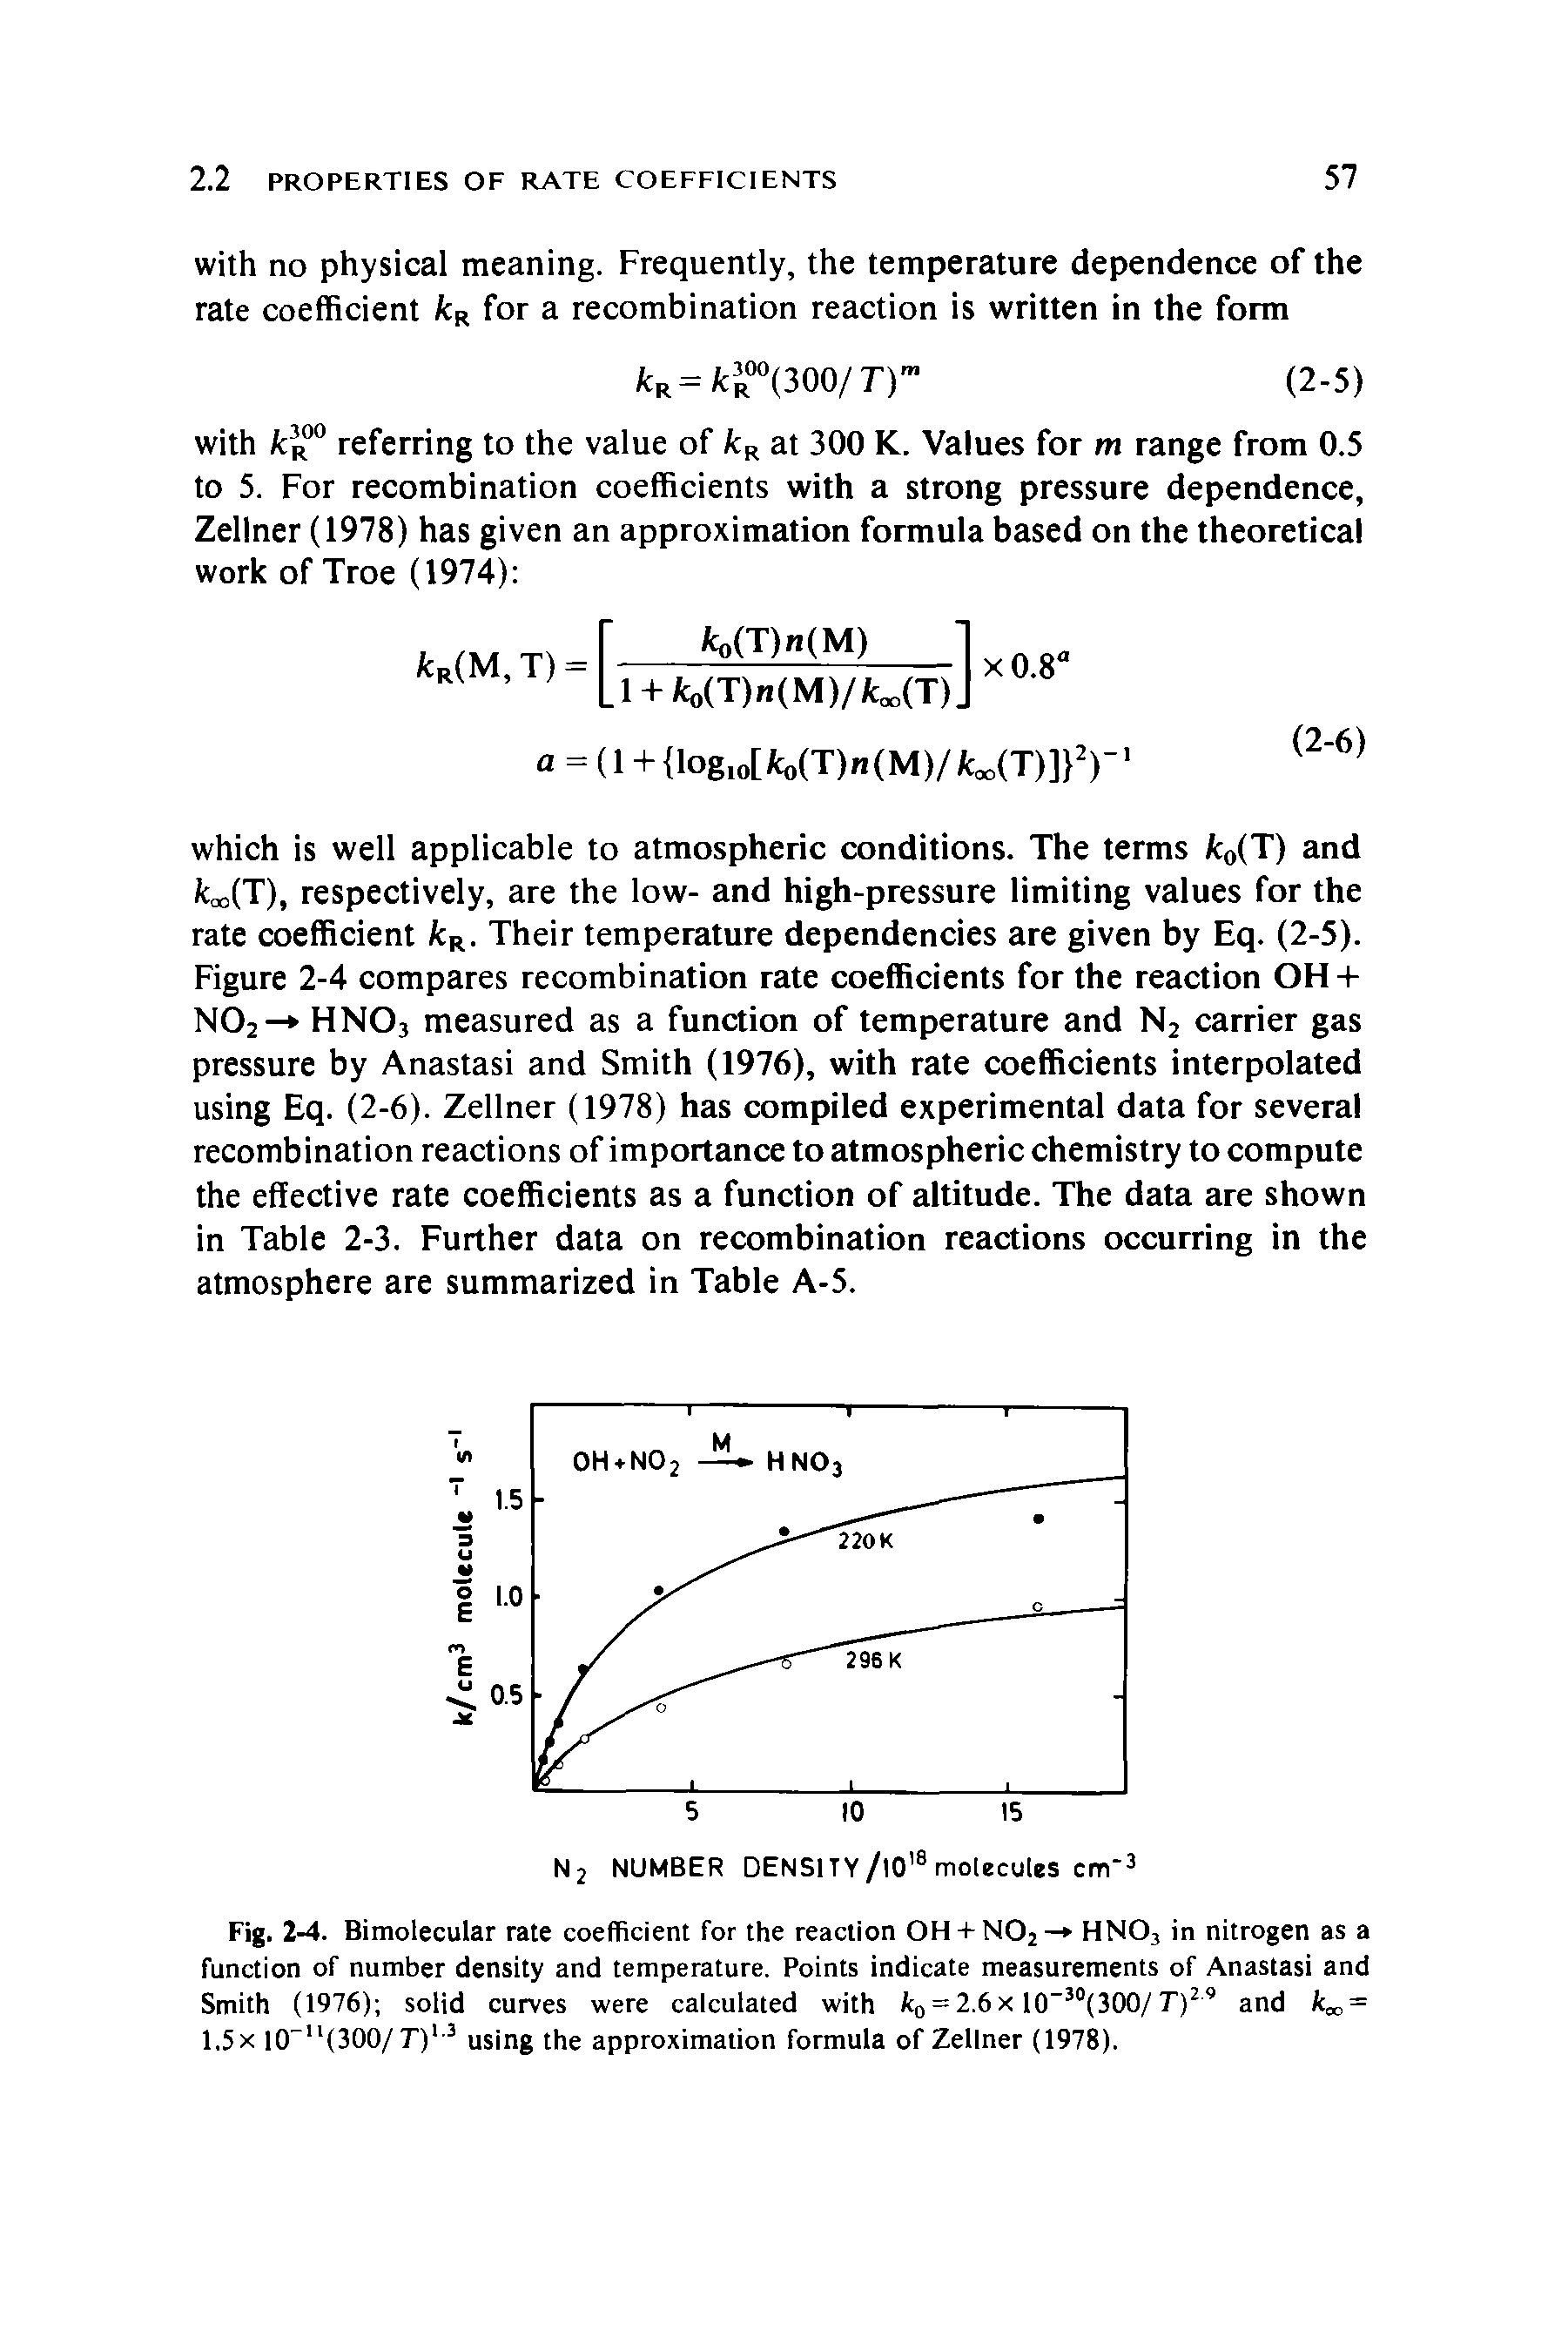 Fig. 2-4. Bimolecular rate coefficient for the reaction OH + N02-> HN03 in nitrogen as a function of number density and temperature. Points indicate measurements of Anastasi and Smith (1976) solid curves were calculated with k0 = 2.6 x 10 30(3 00/ T)29 and / = 1.5x 10 1 (300/ T)13 using the approximation formula of Zellner (1978).